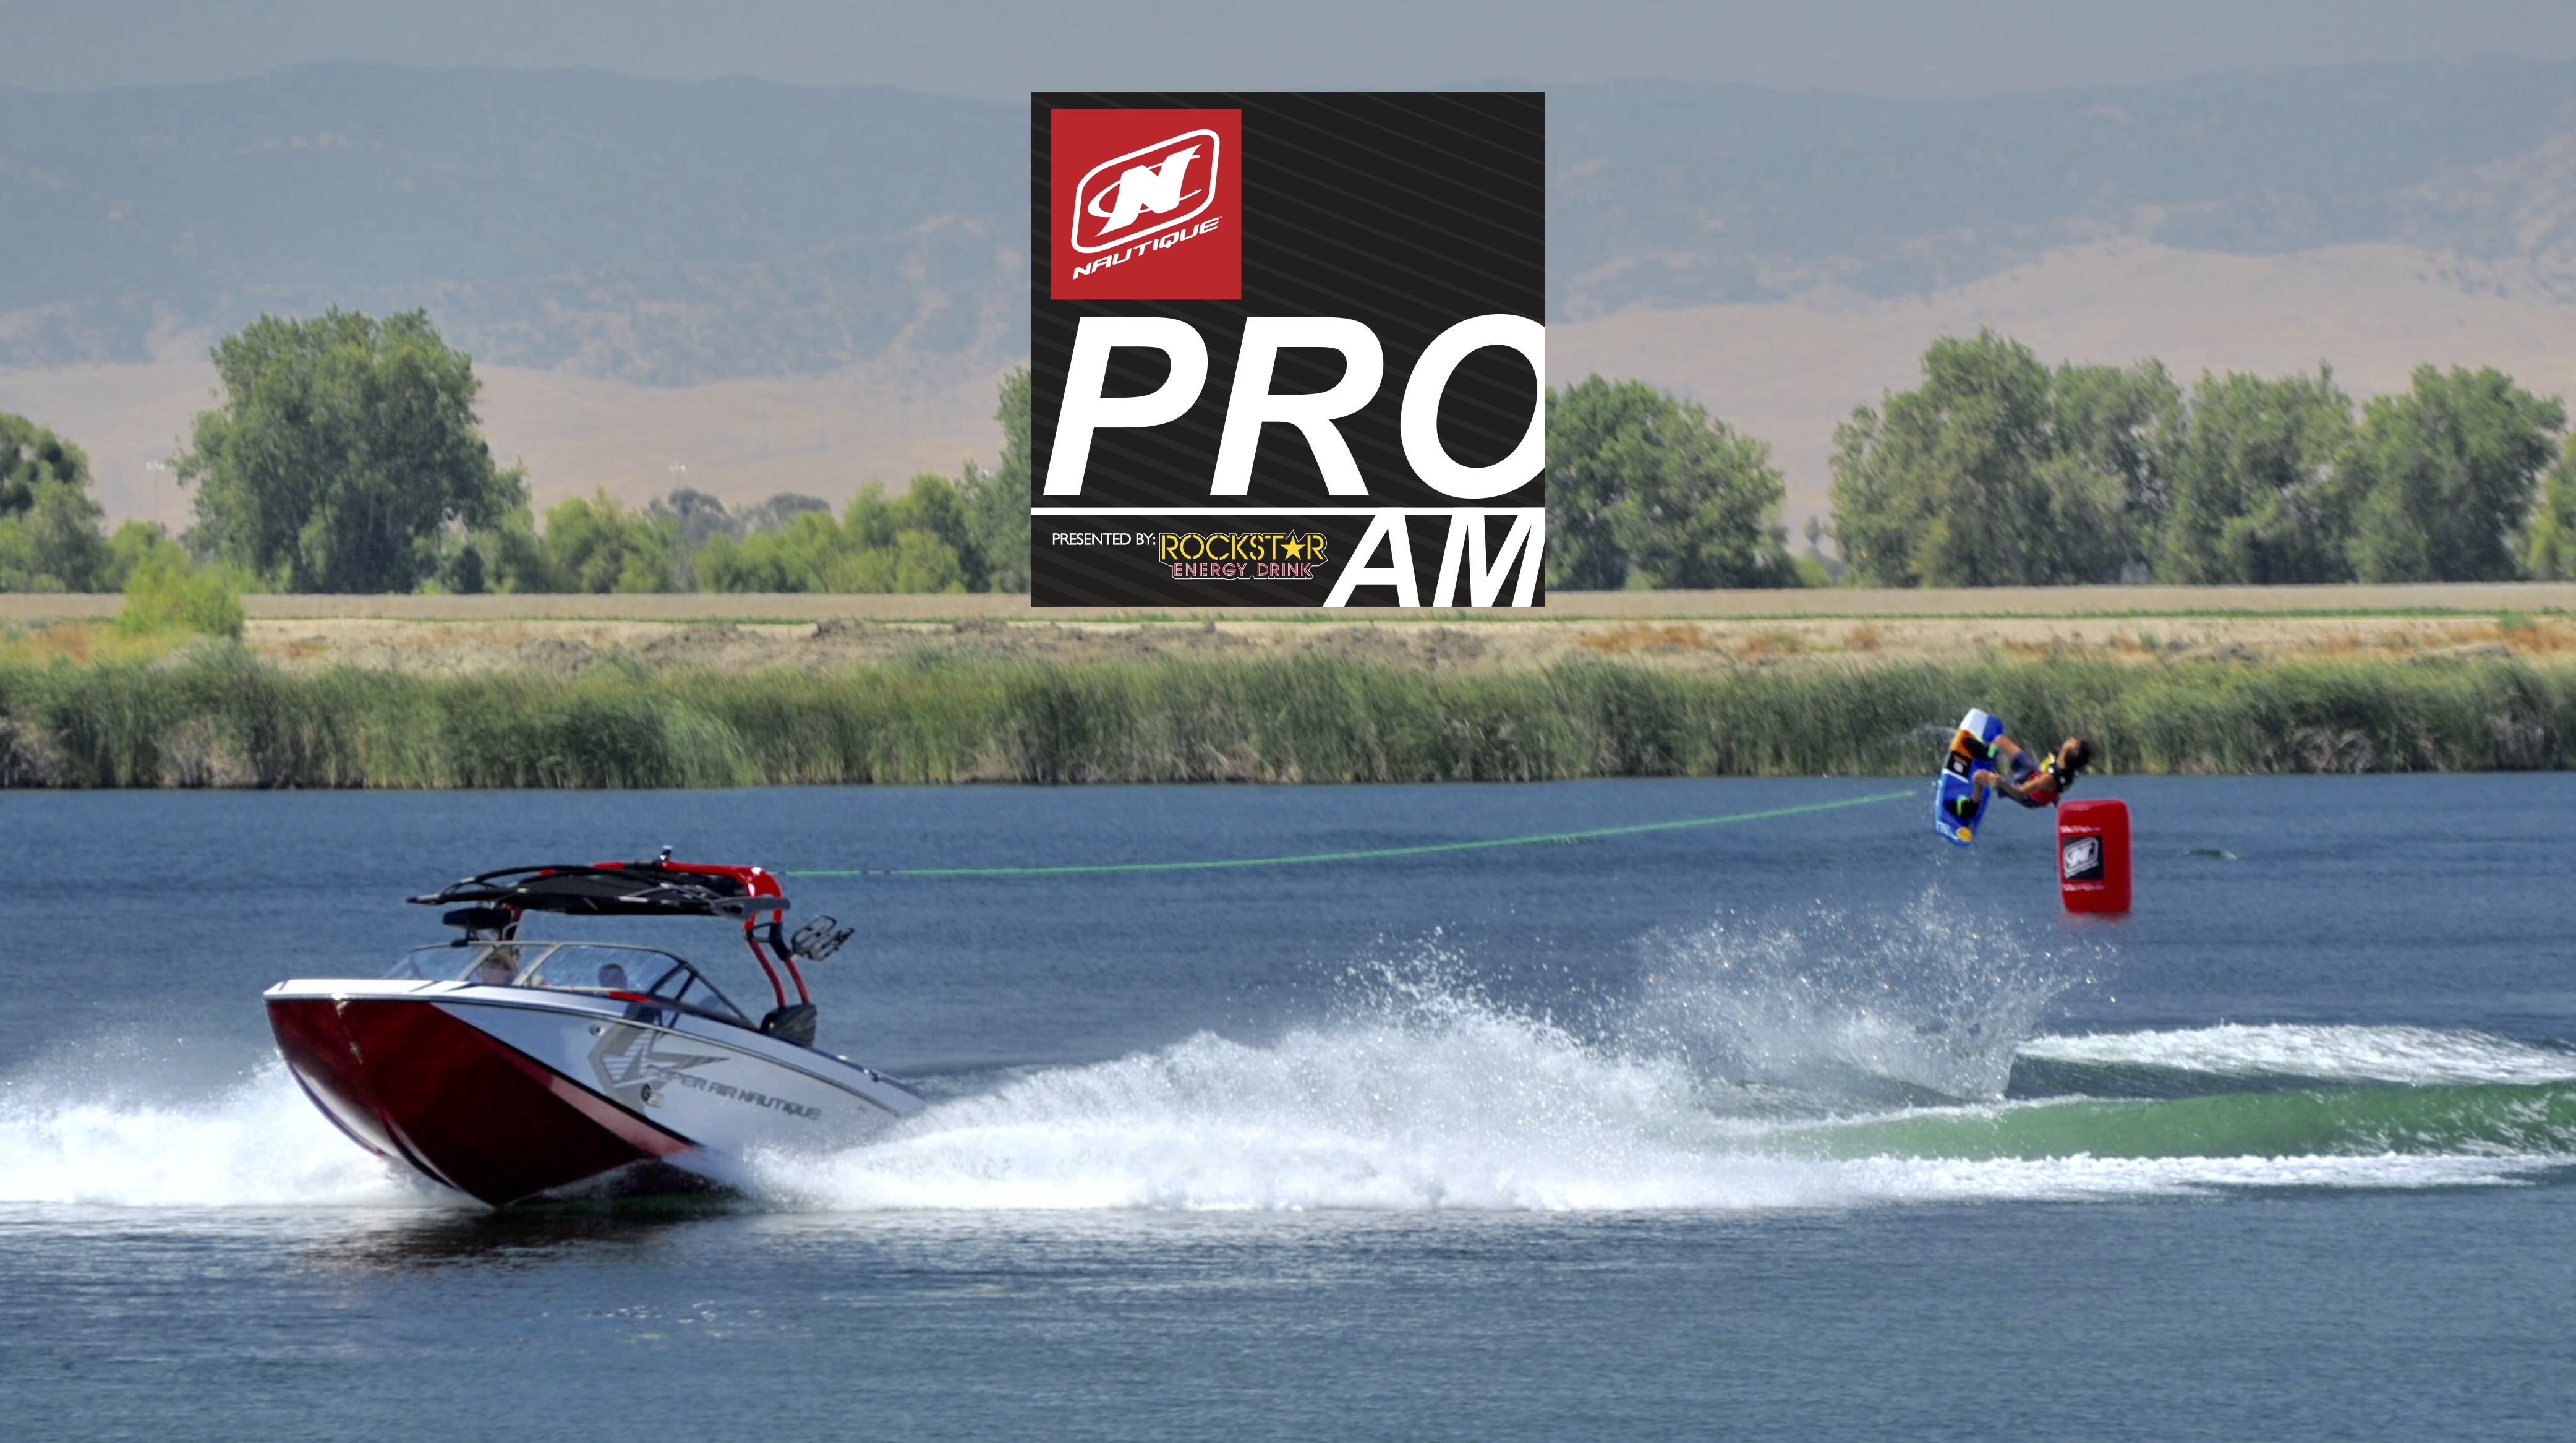 West Coast Riders Hit the Water for the Nautique Pro Am Presented by Rockstar picture